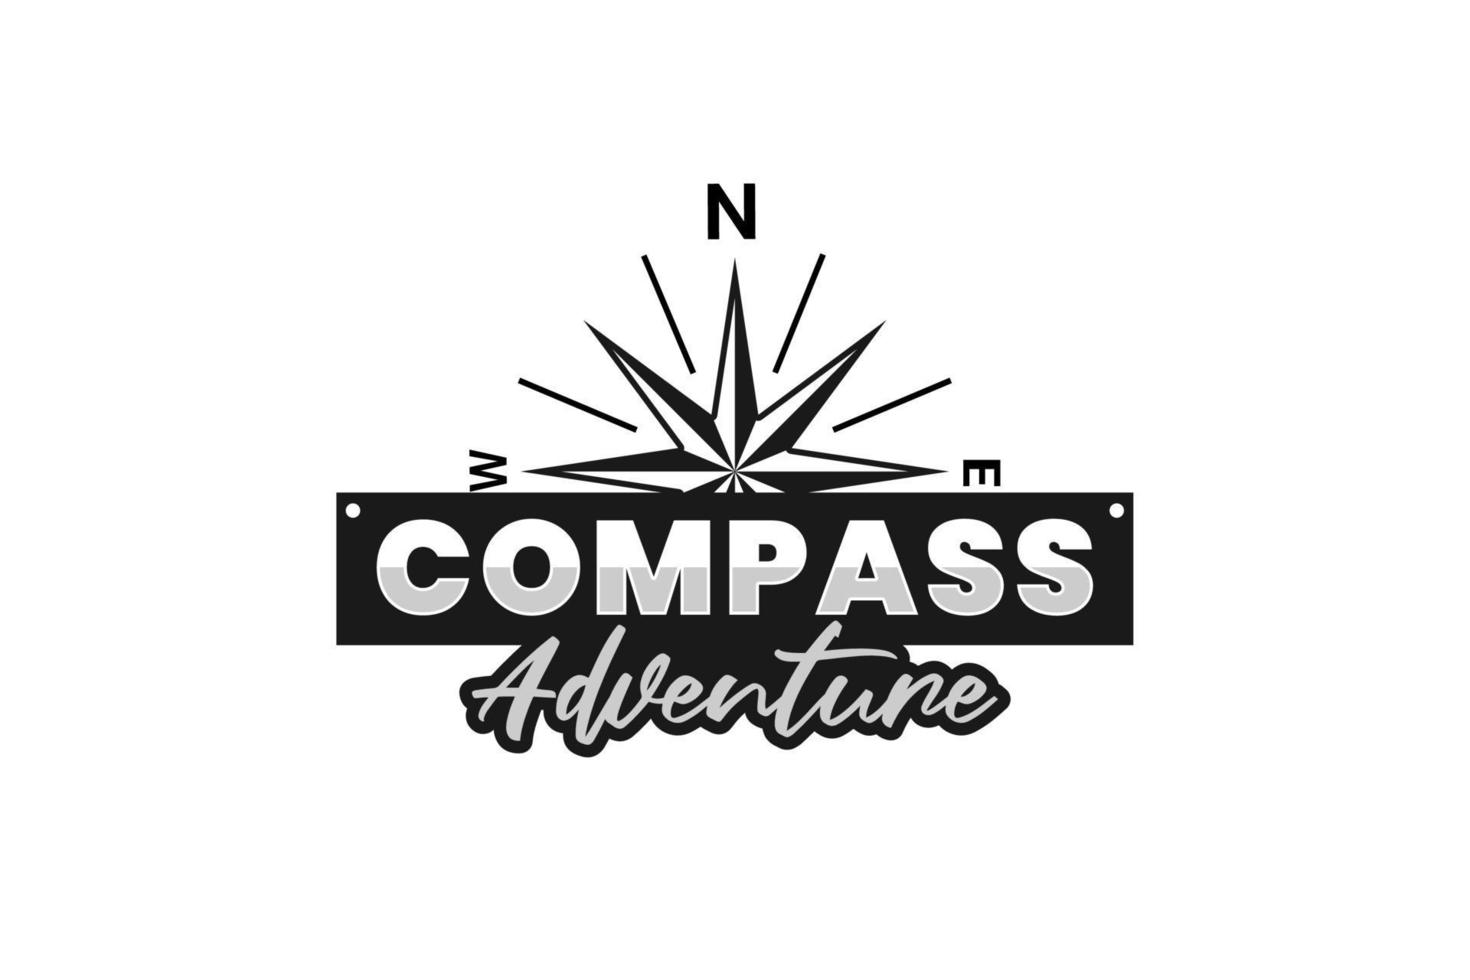 Compass Logo And Compass Typography Design For Hipster Adventure Community vector